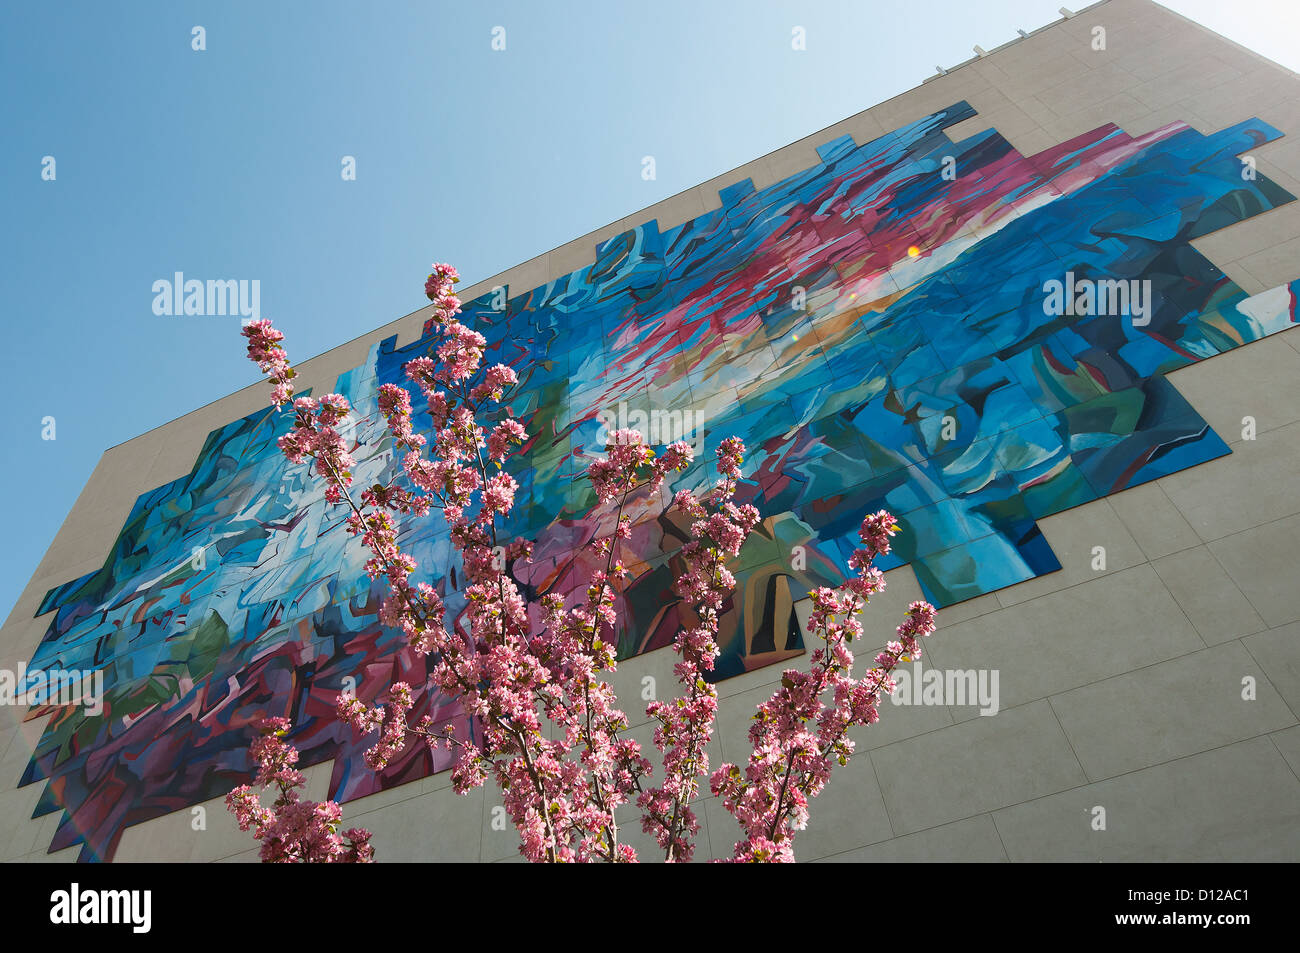 Colourful Abstract Mural On The Side Of A Building With A Cherry Blossom Tree; Edmonton Alberta Canada Stock Photo